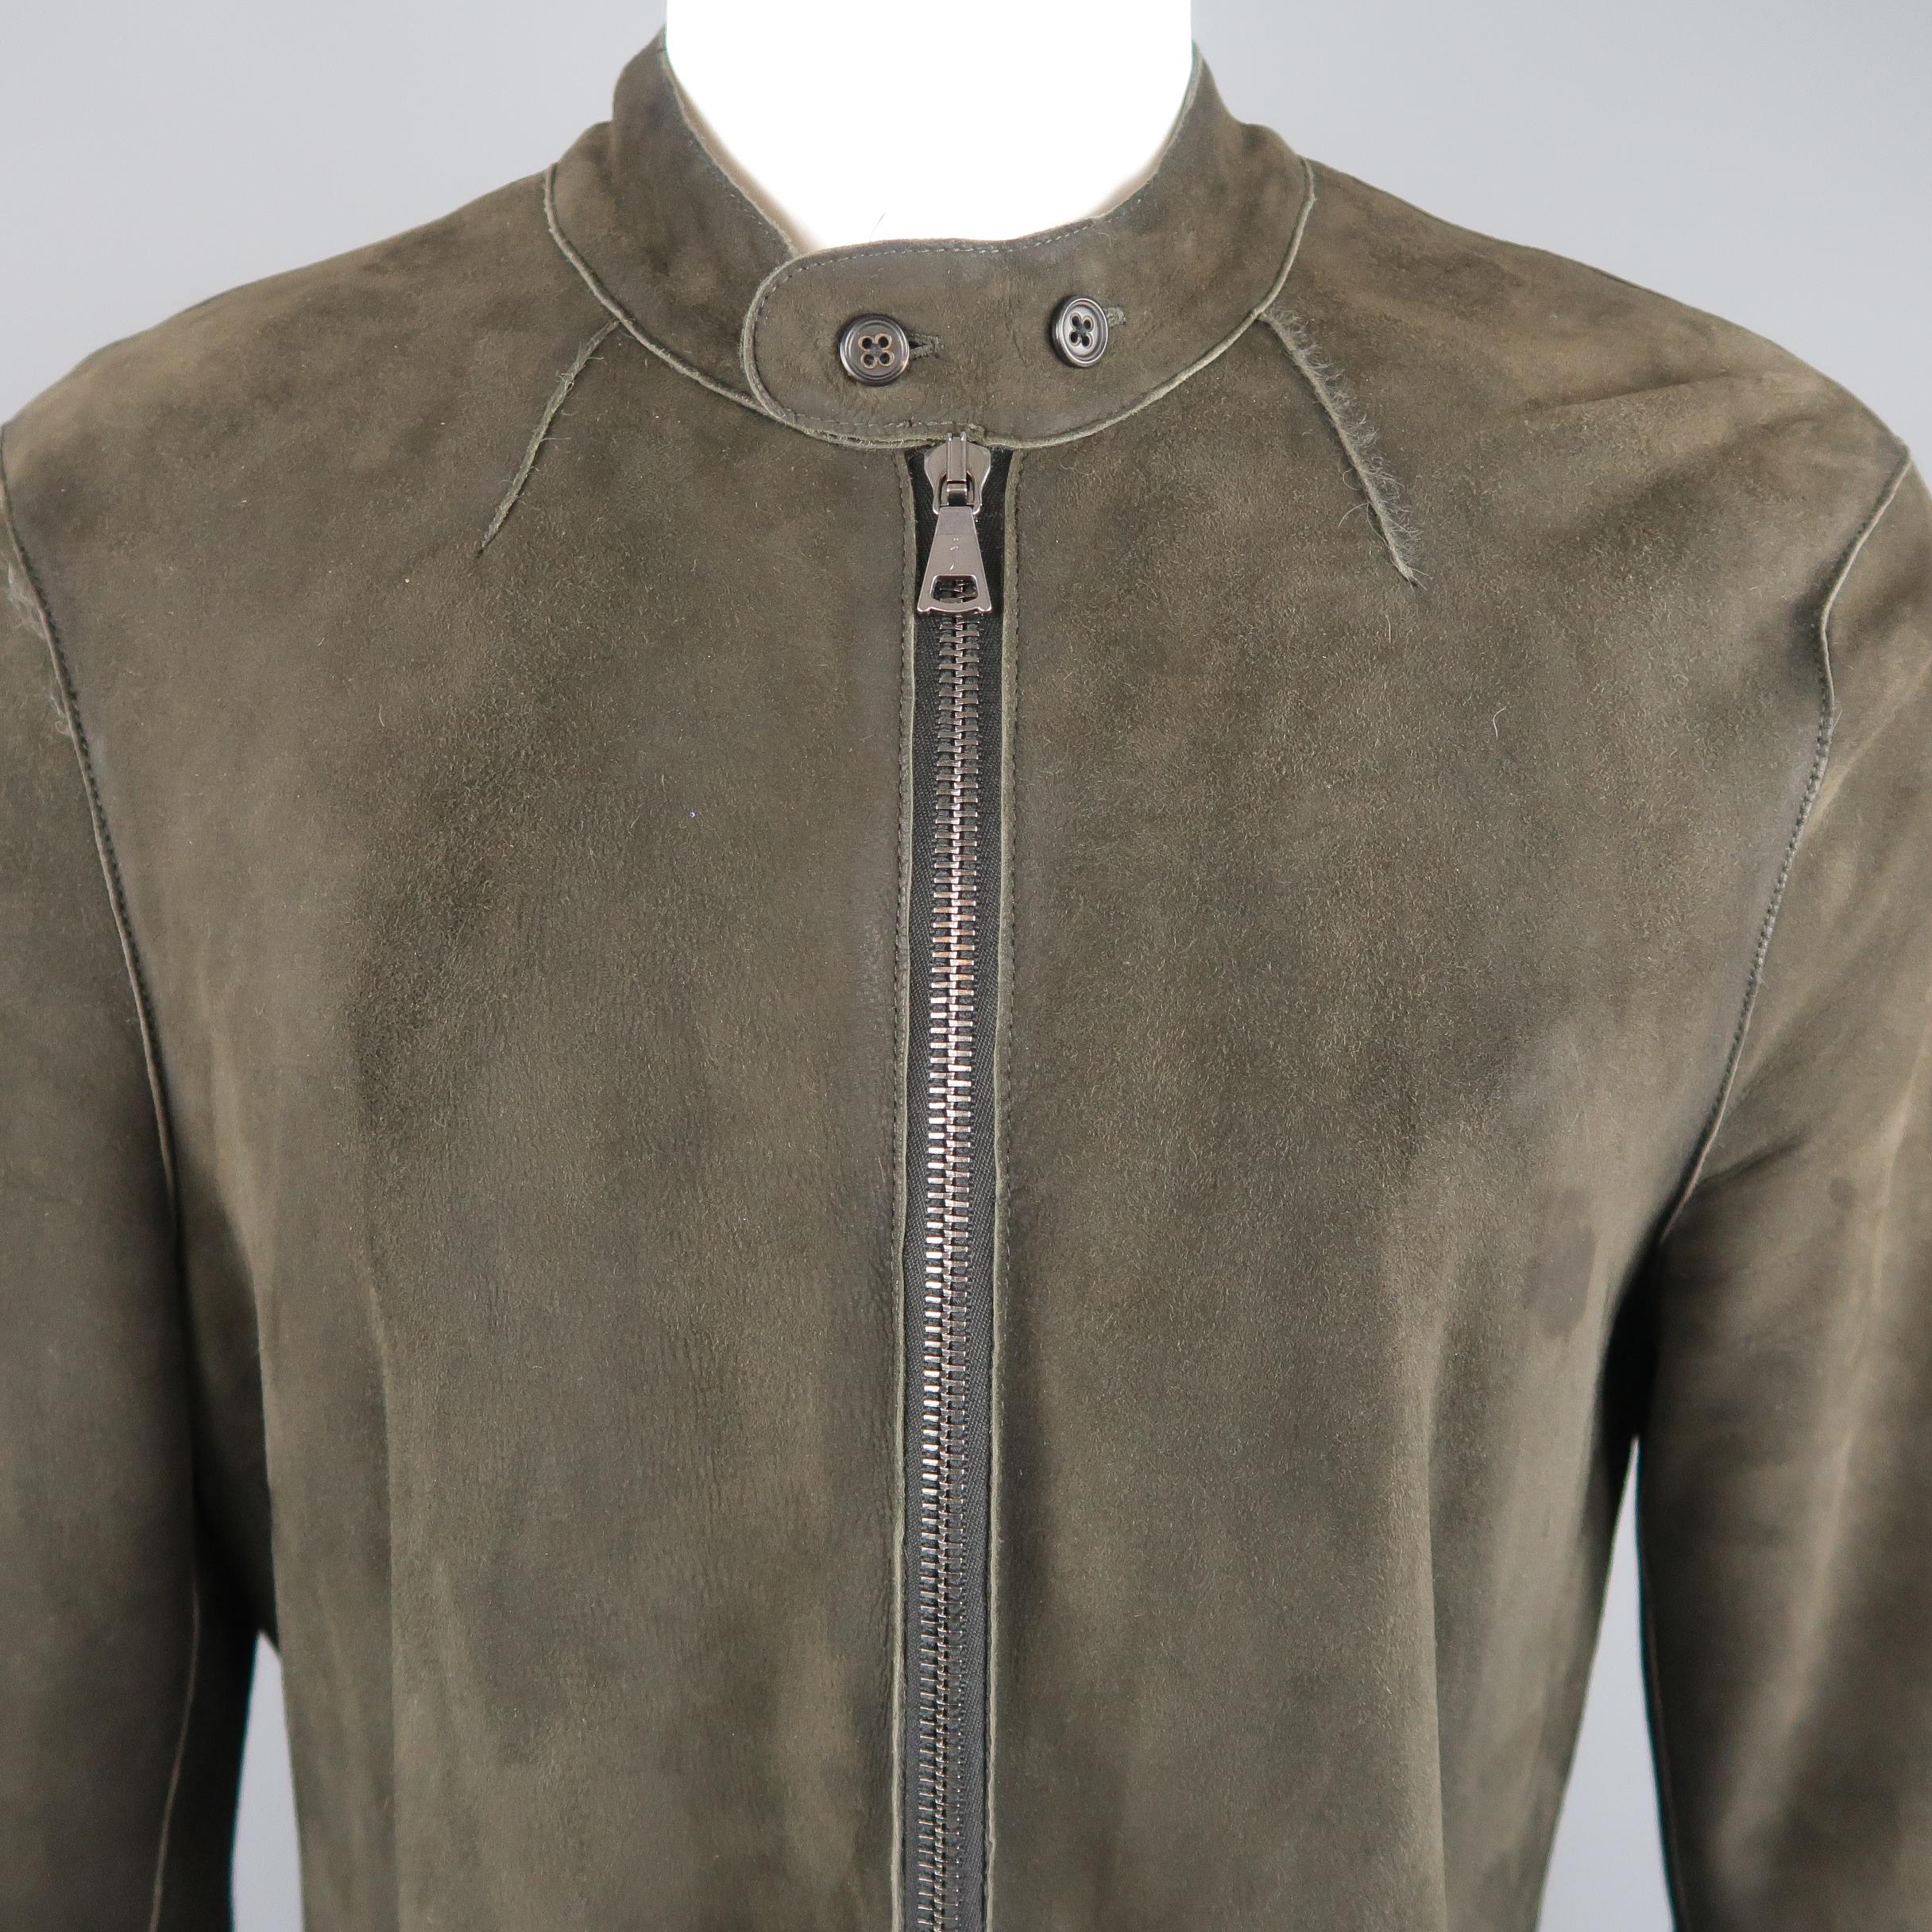 JOHN VARVATOS coat comes in olive green shearling with full fur liner, and features a band collar, zip front, double zip pockets, and zip cuffs. Wear throughout.
 
Good Pre-Owned Condition.
Marked: IT 50
 
Measurements:
 
Shoulder: 19 in.
Chest: 44